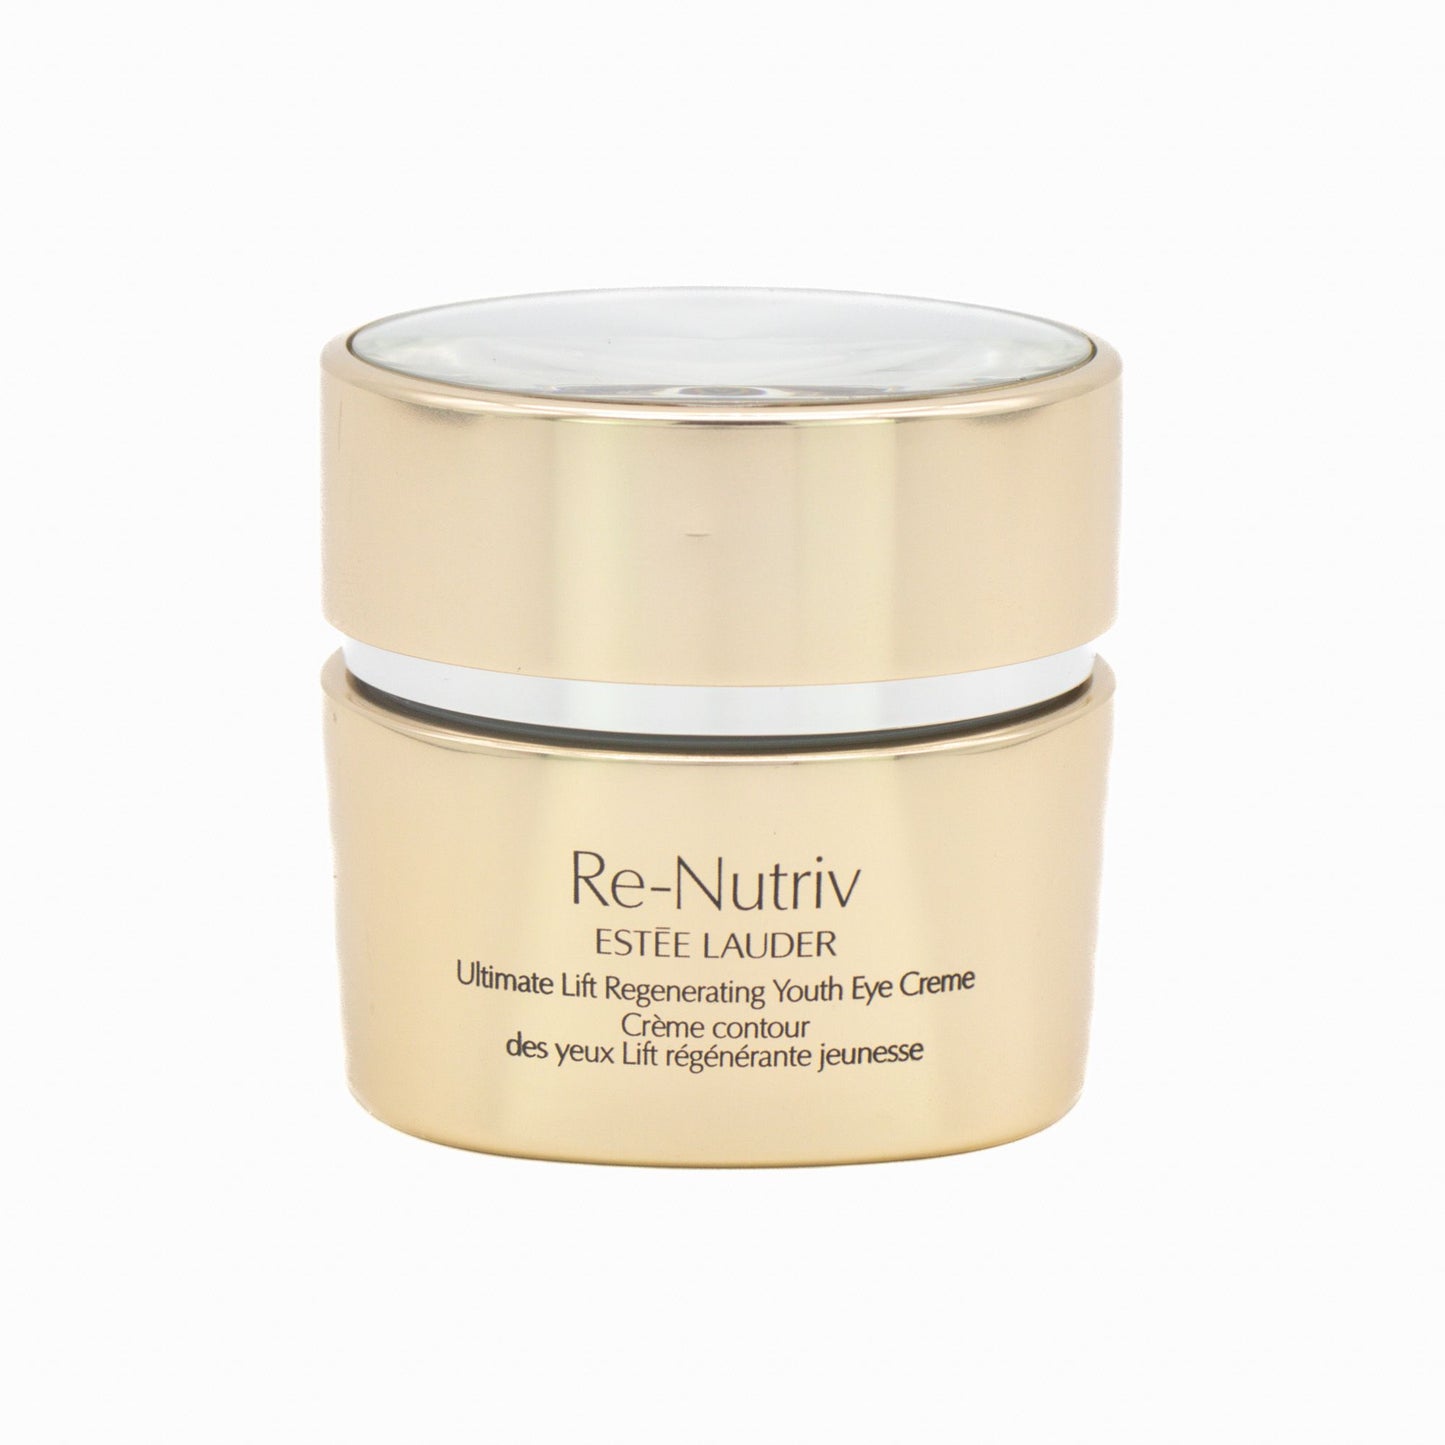 Estee Lauder Re-Nutriv Ultimate Lift Youth Eye Creme 15ml - Imperfect Box